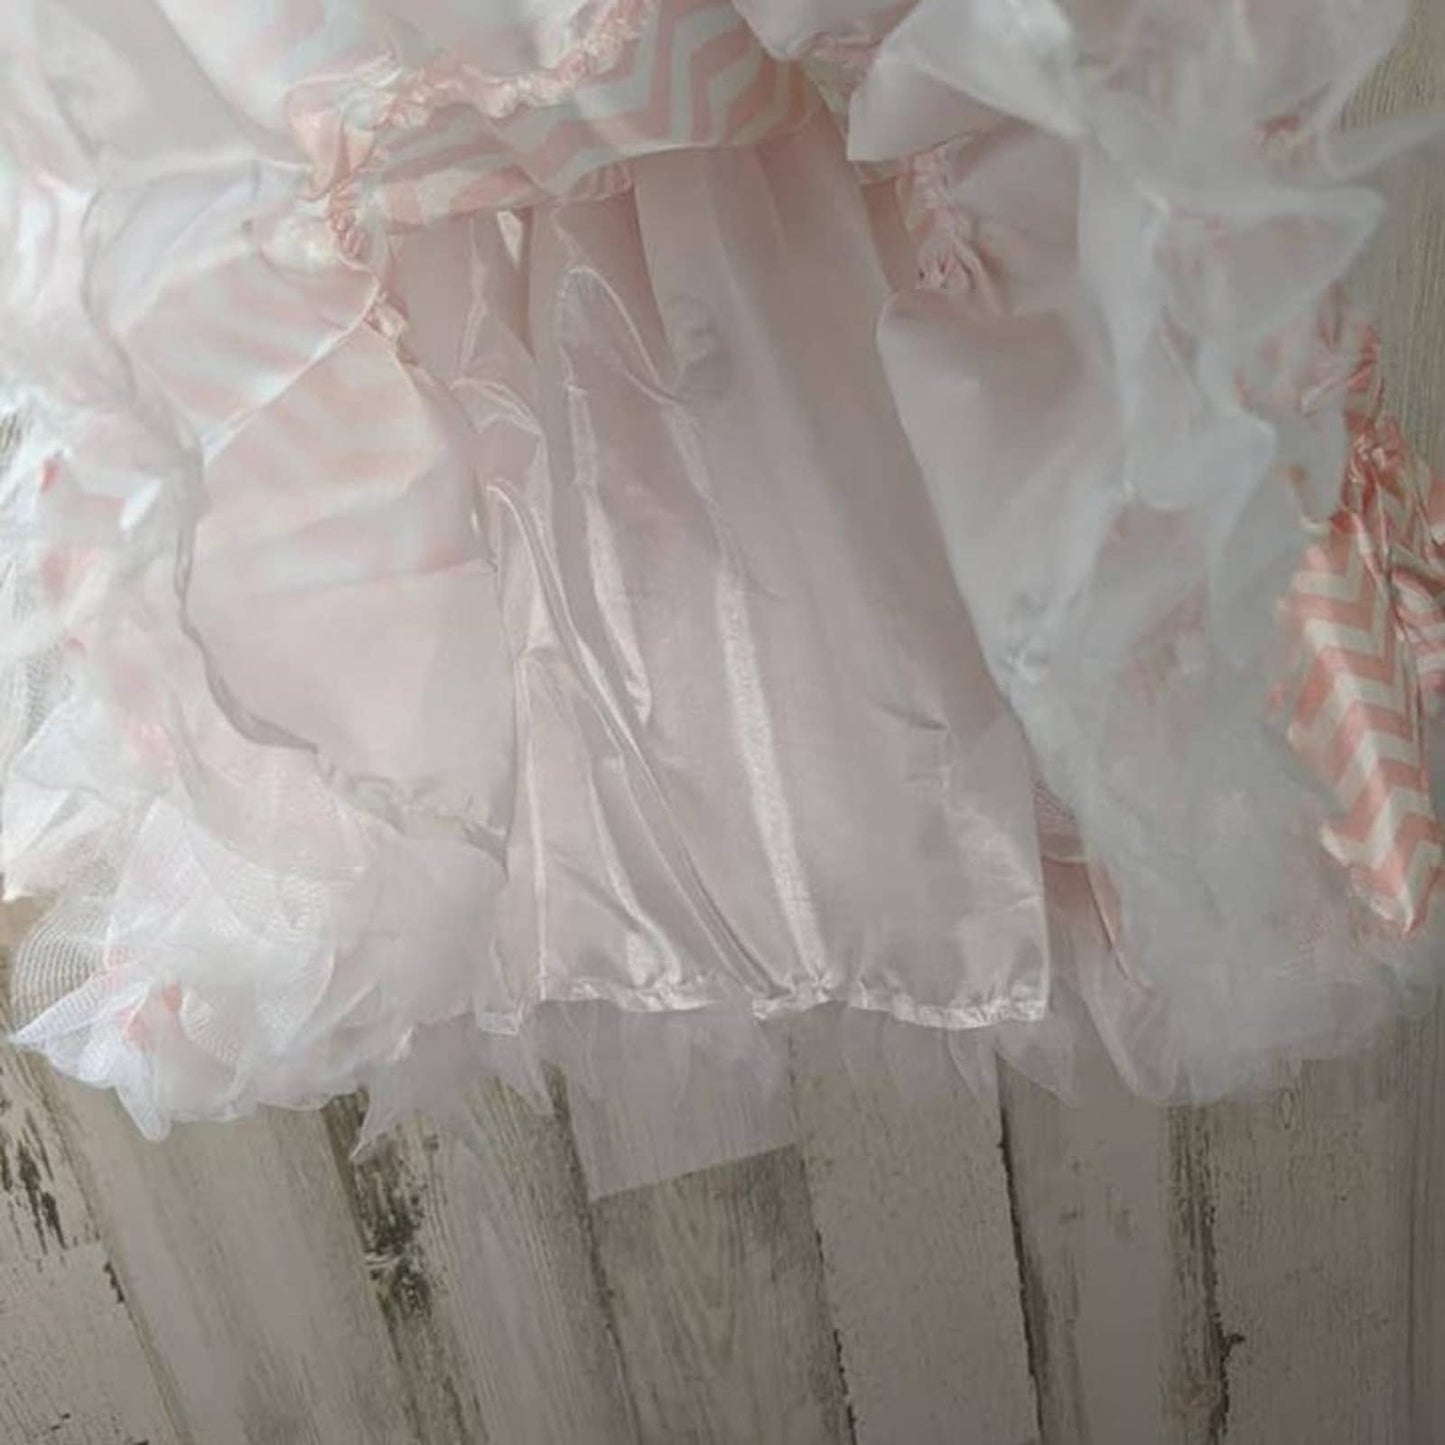 Pink and Peach Chevron Tutu with Bow